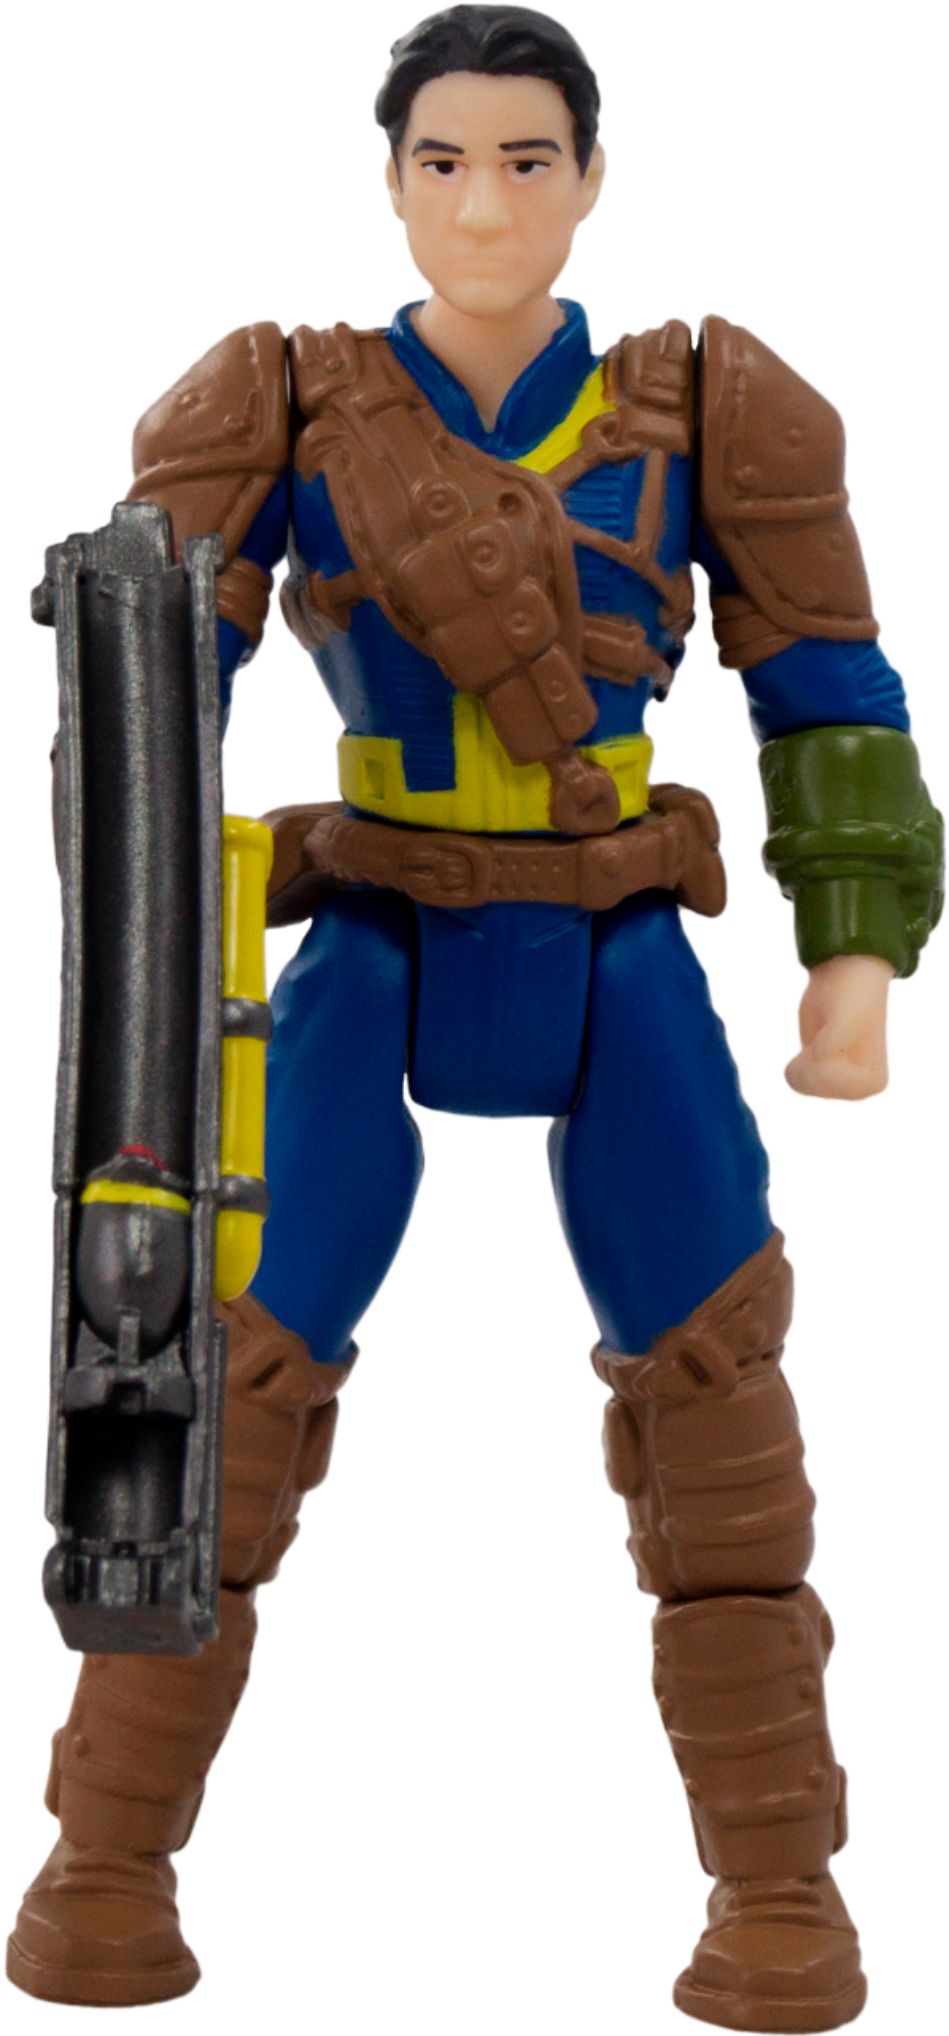 Fallout - Mega Merge 4" Action Figure - Styles May Vary